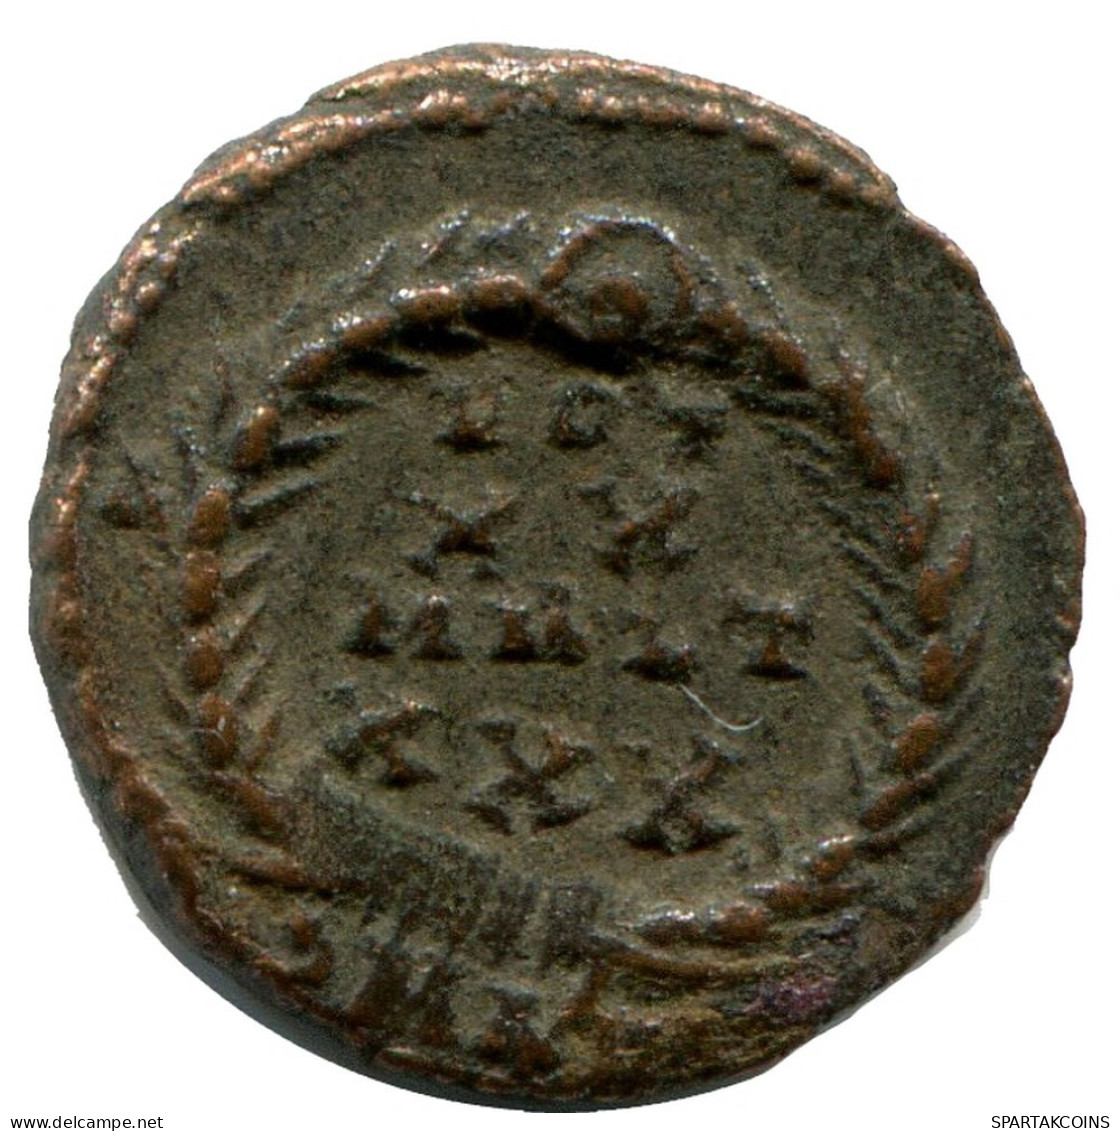 CONSTANTIUS II ALEKSANDRIA FROM THE ROYAL ONTARIO MUSEUM #ANC10497.14.U.A - The Christian Empire (307 AD To 363 AD)